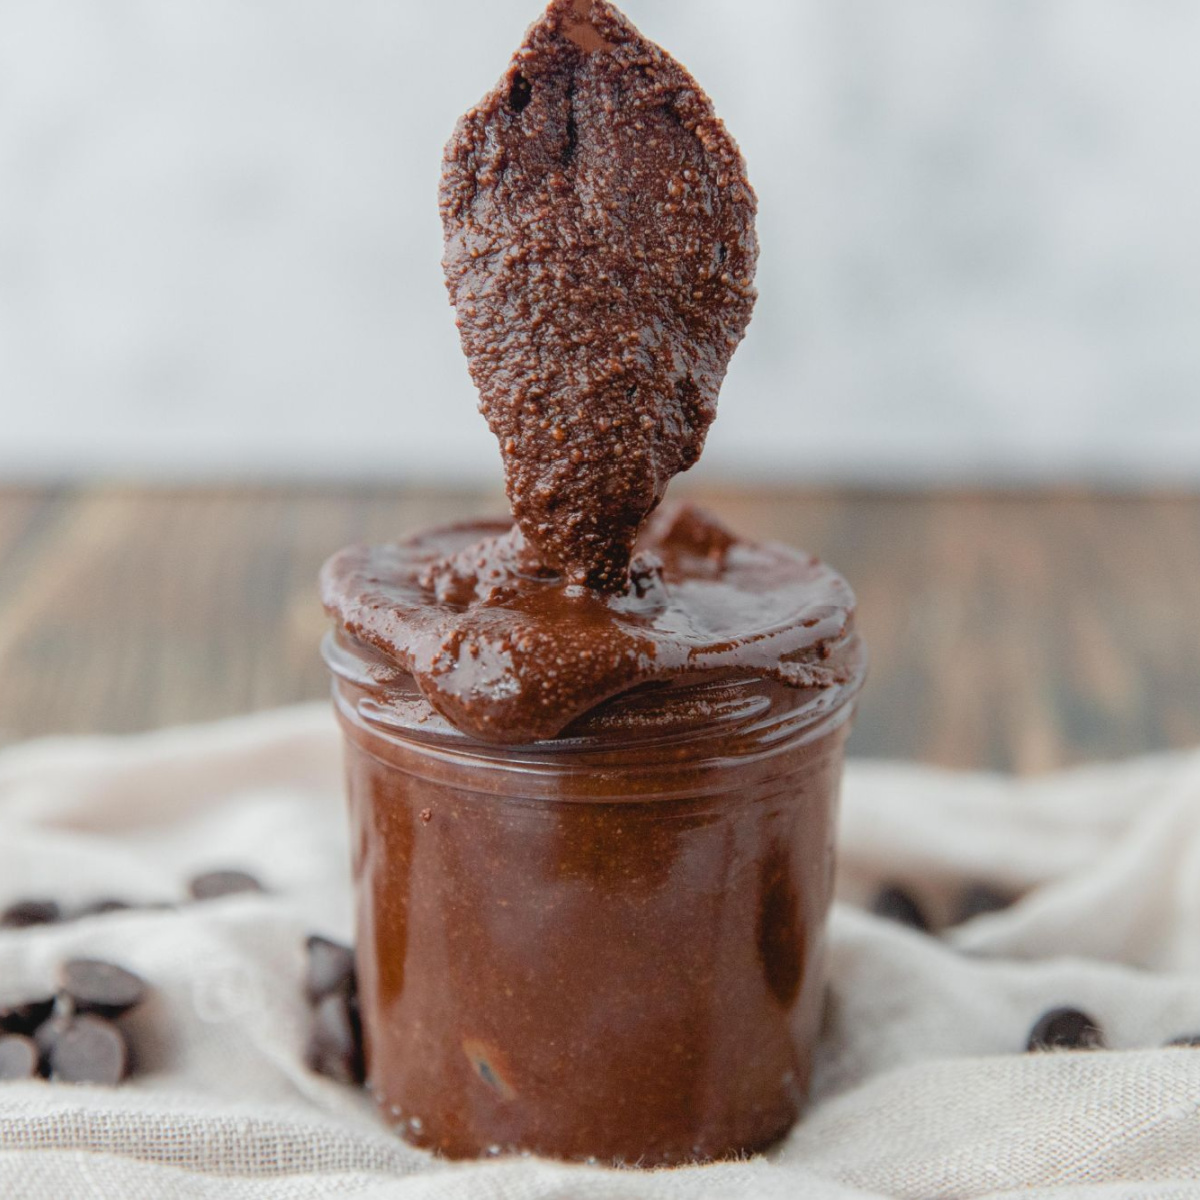 A gold spoon scooping some homemade nutella out of a glass jar